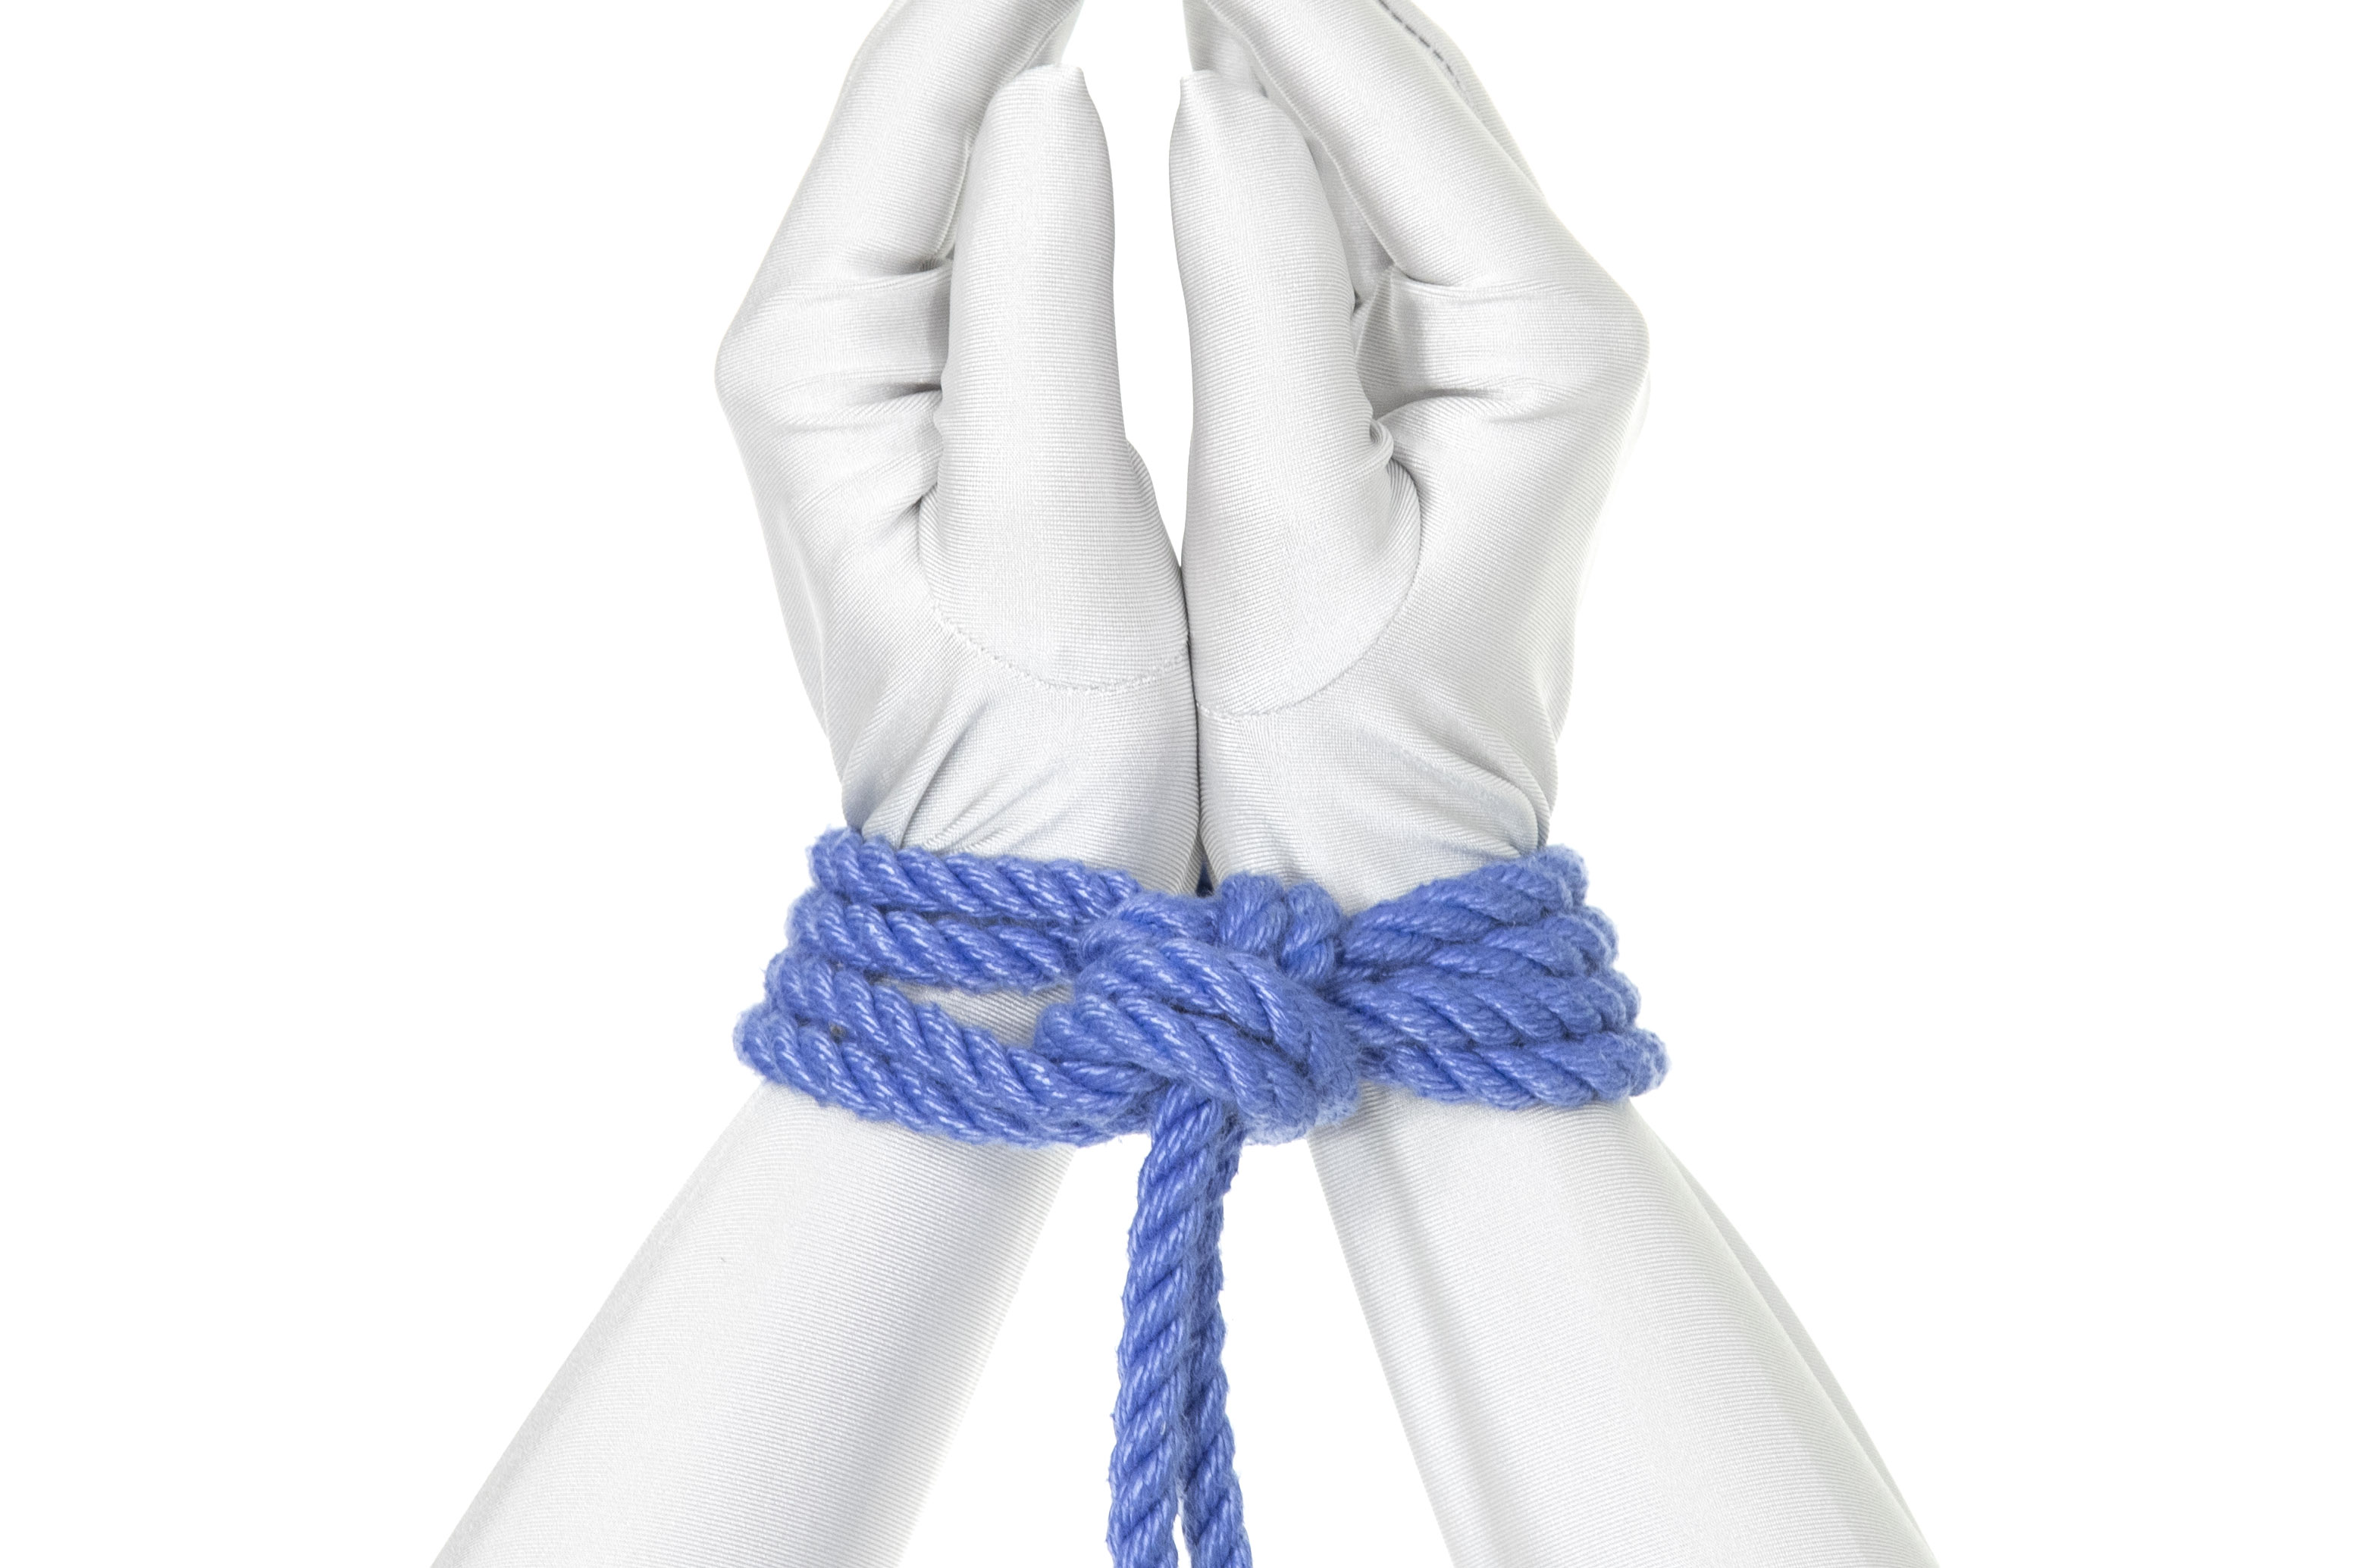 Two hands in a white bodysuit tied together at the wrists with blue rope.